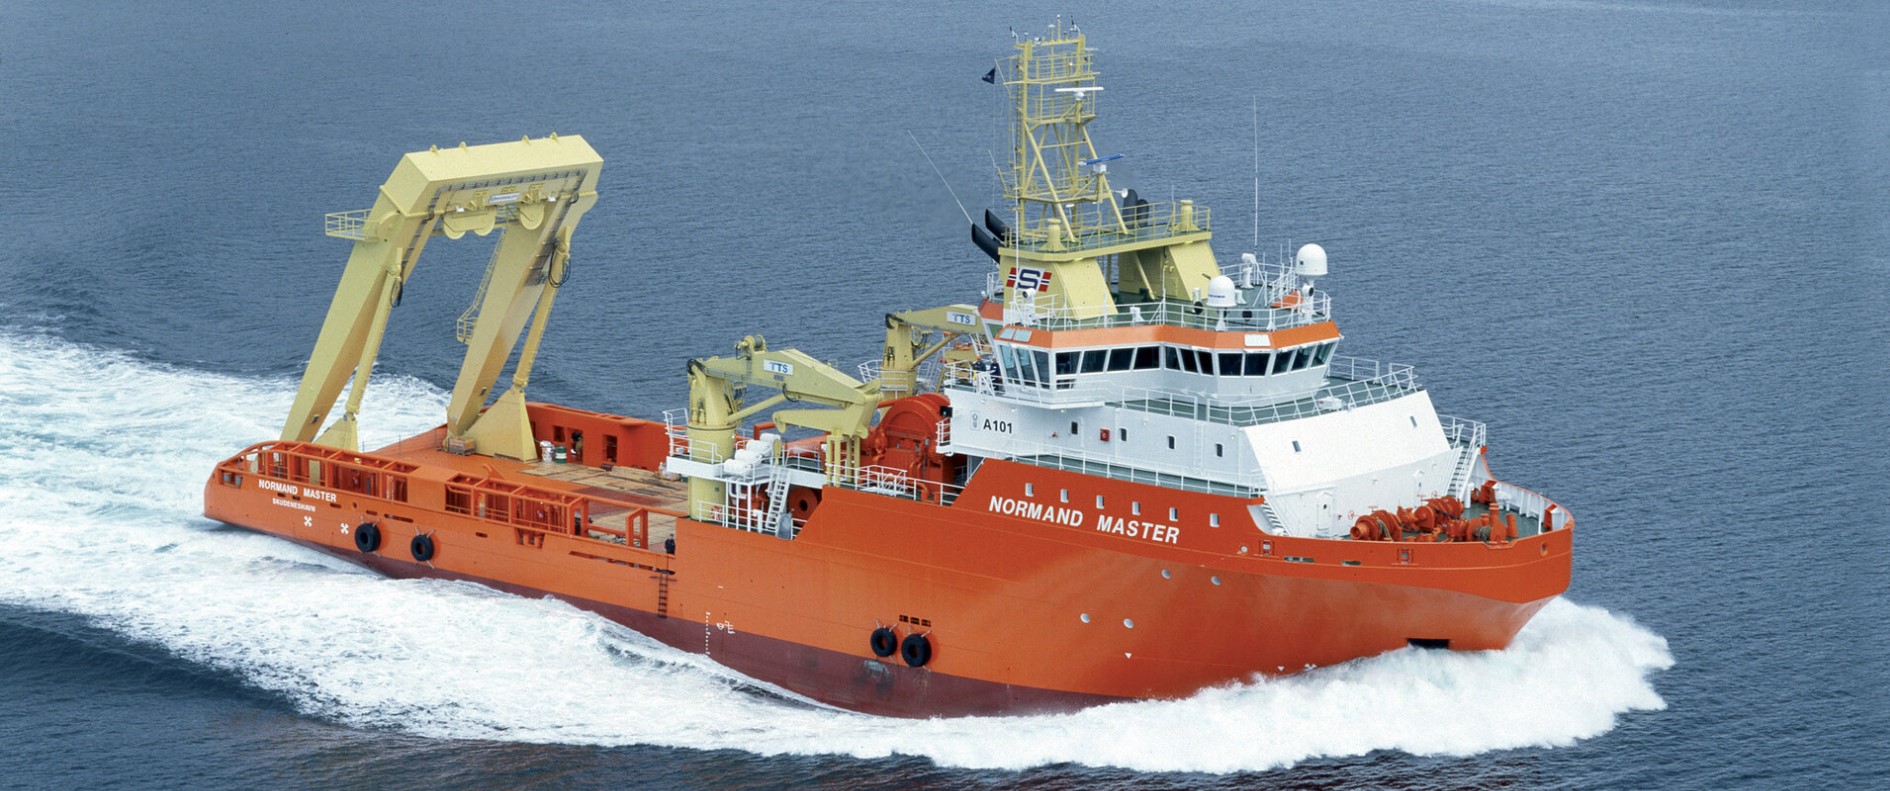 Solstad reshuffles its fleet by offloading two more vessels